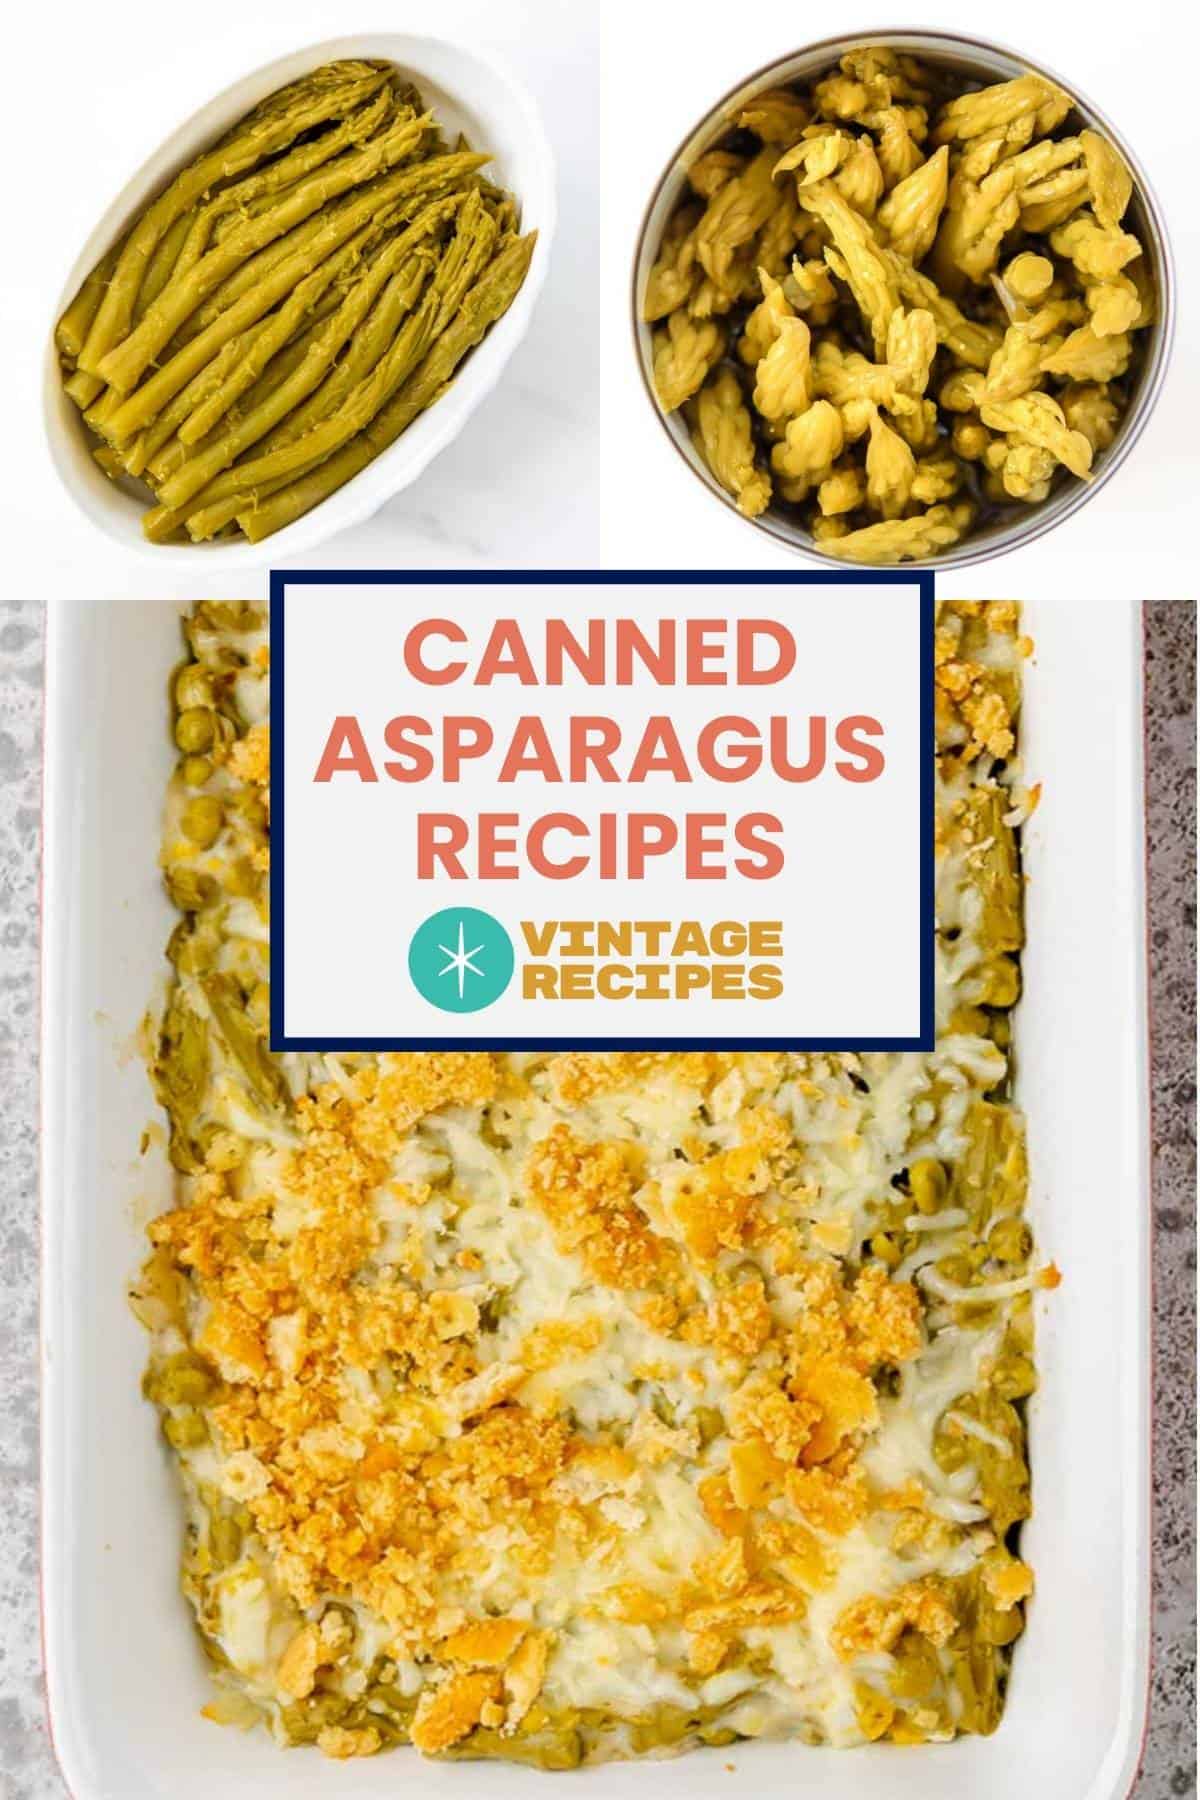 Asparagus in a dish, can, and casserole.